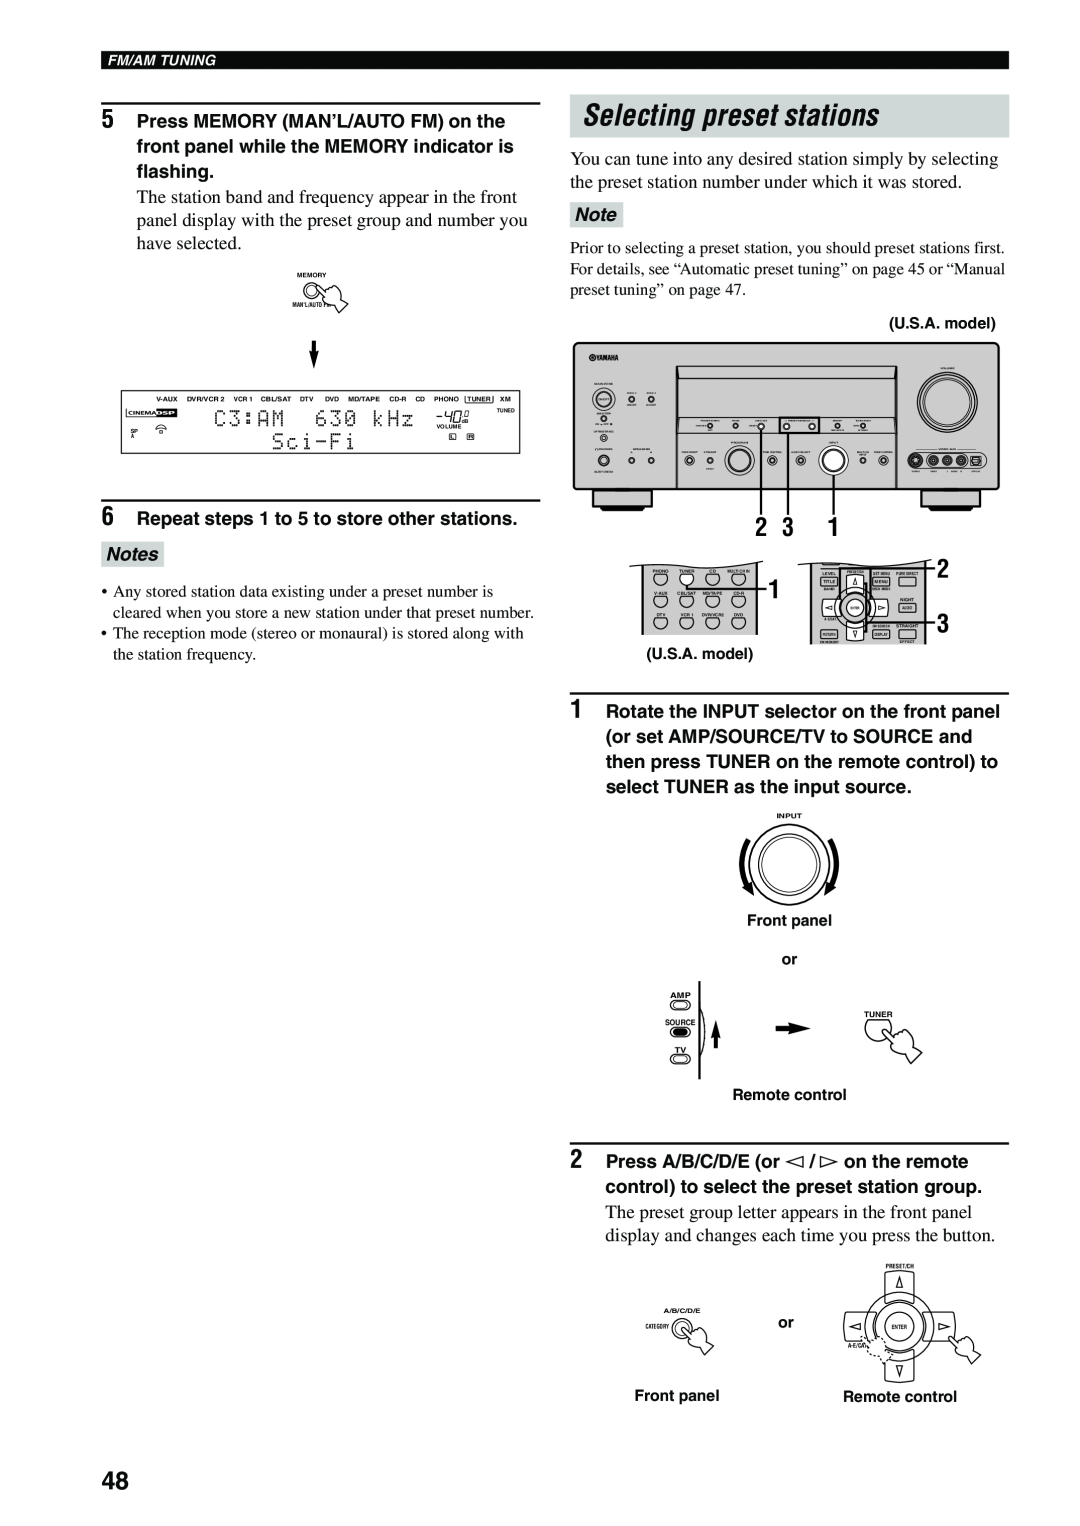 Yamaha HTR-5990 owner manual Selecting preset stations, C3:AM, Sci-Fi, Notes 